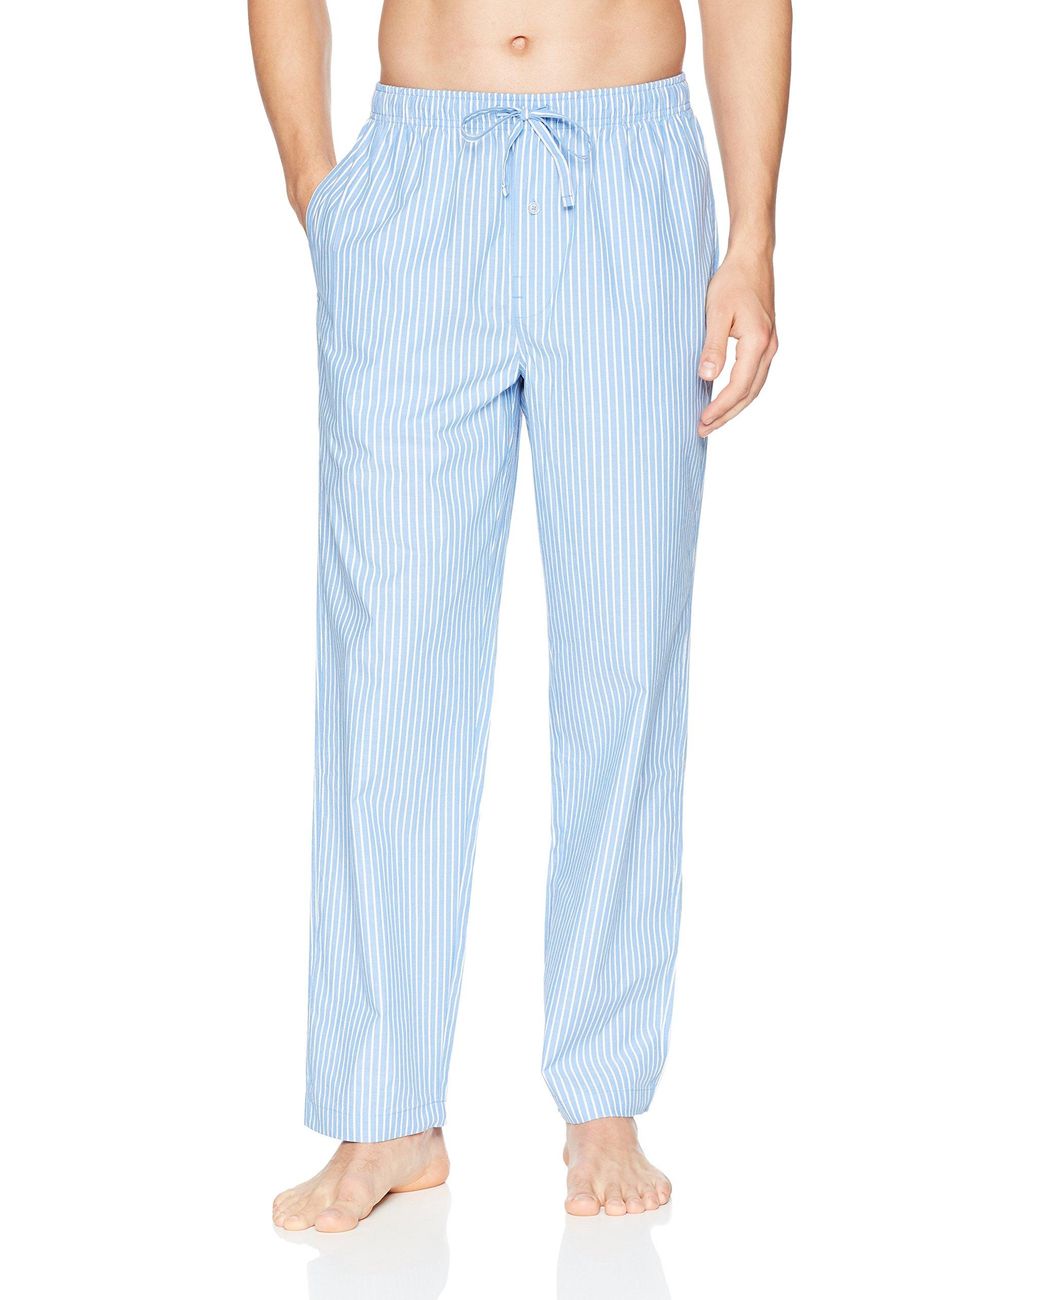 Amazon Essentials Straight-fit Woven Pajama Pant in Light Blue Stripe ...